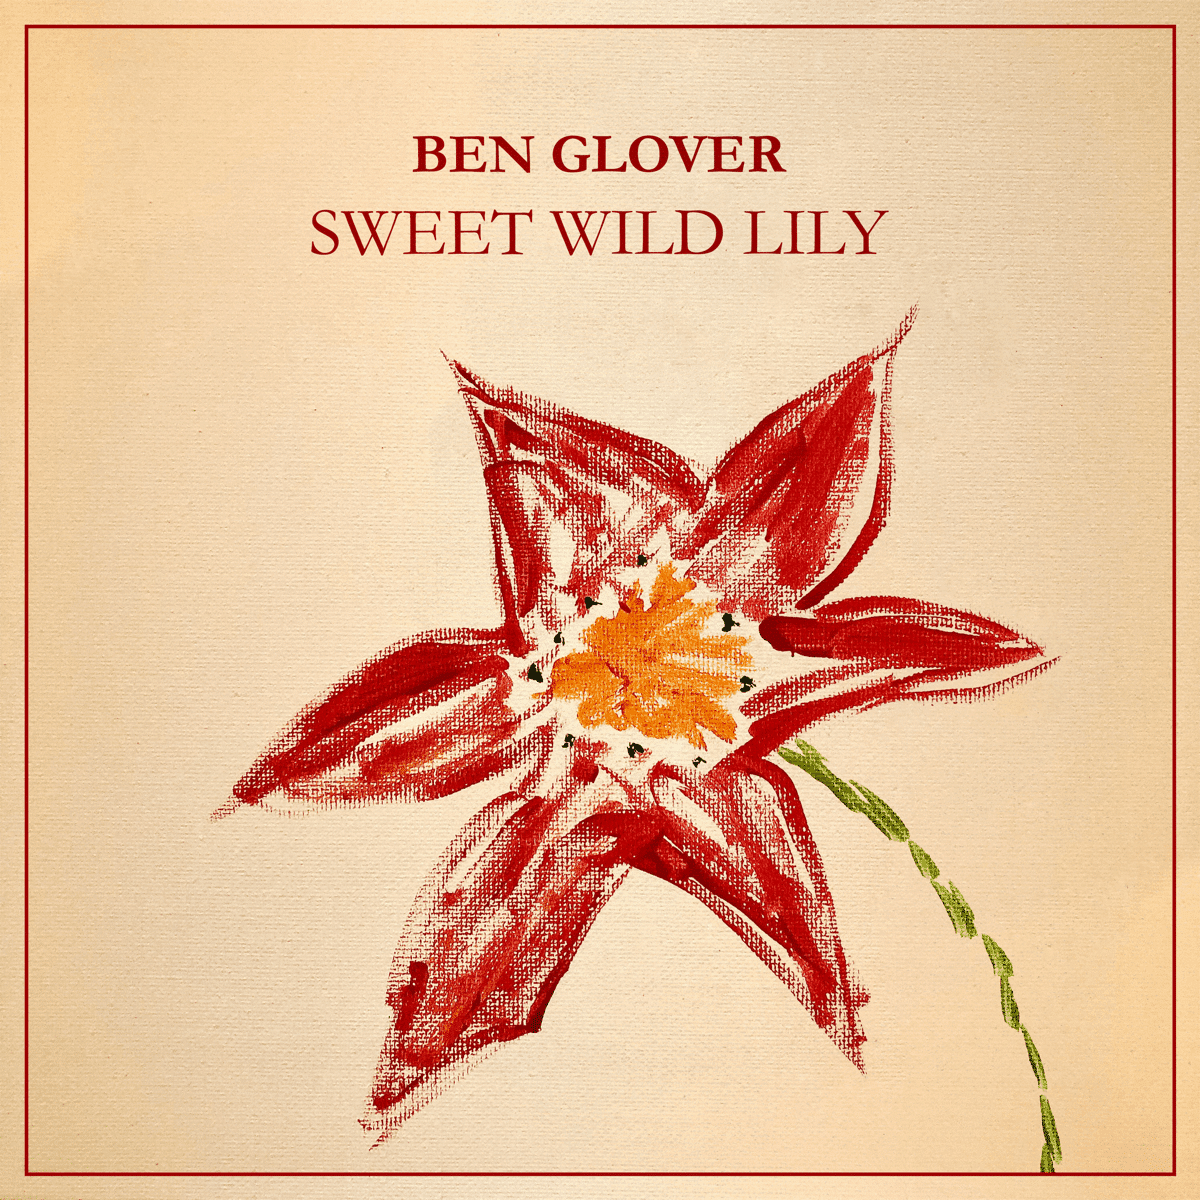 Ben Cover Art for Ben Glover's Sweet Wild Lily